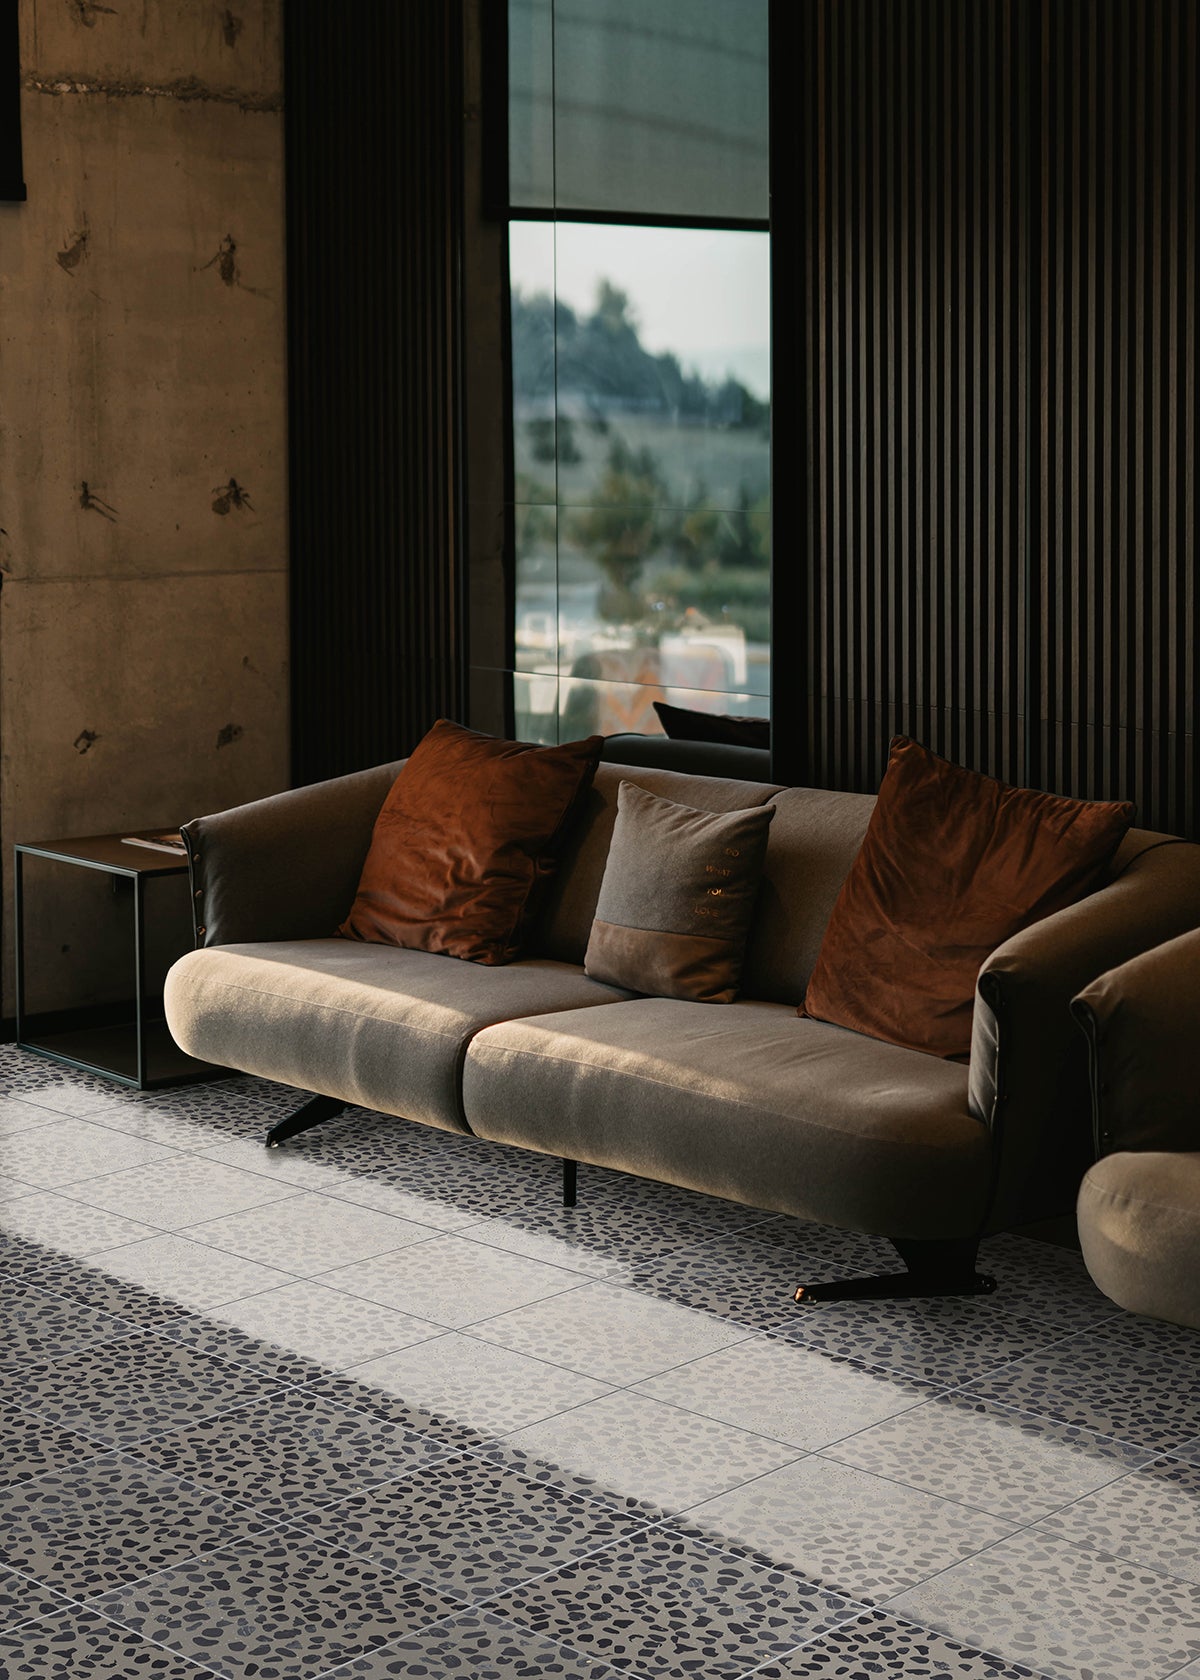 Black, grey and white cement tiles and a couch.